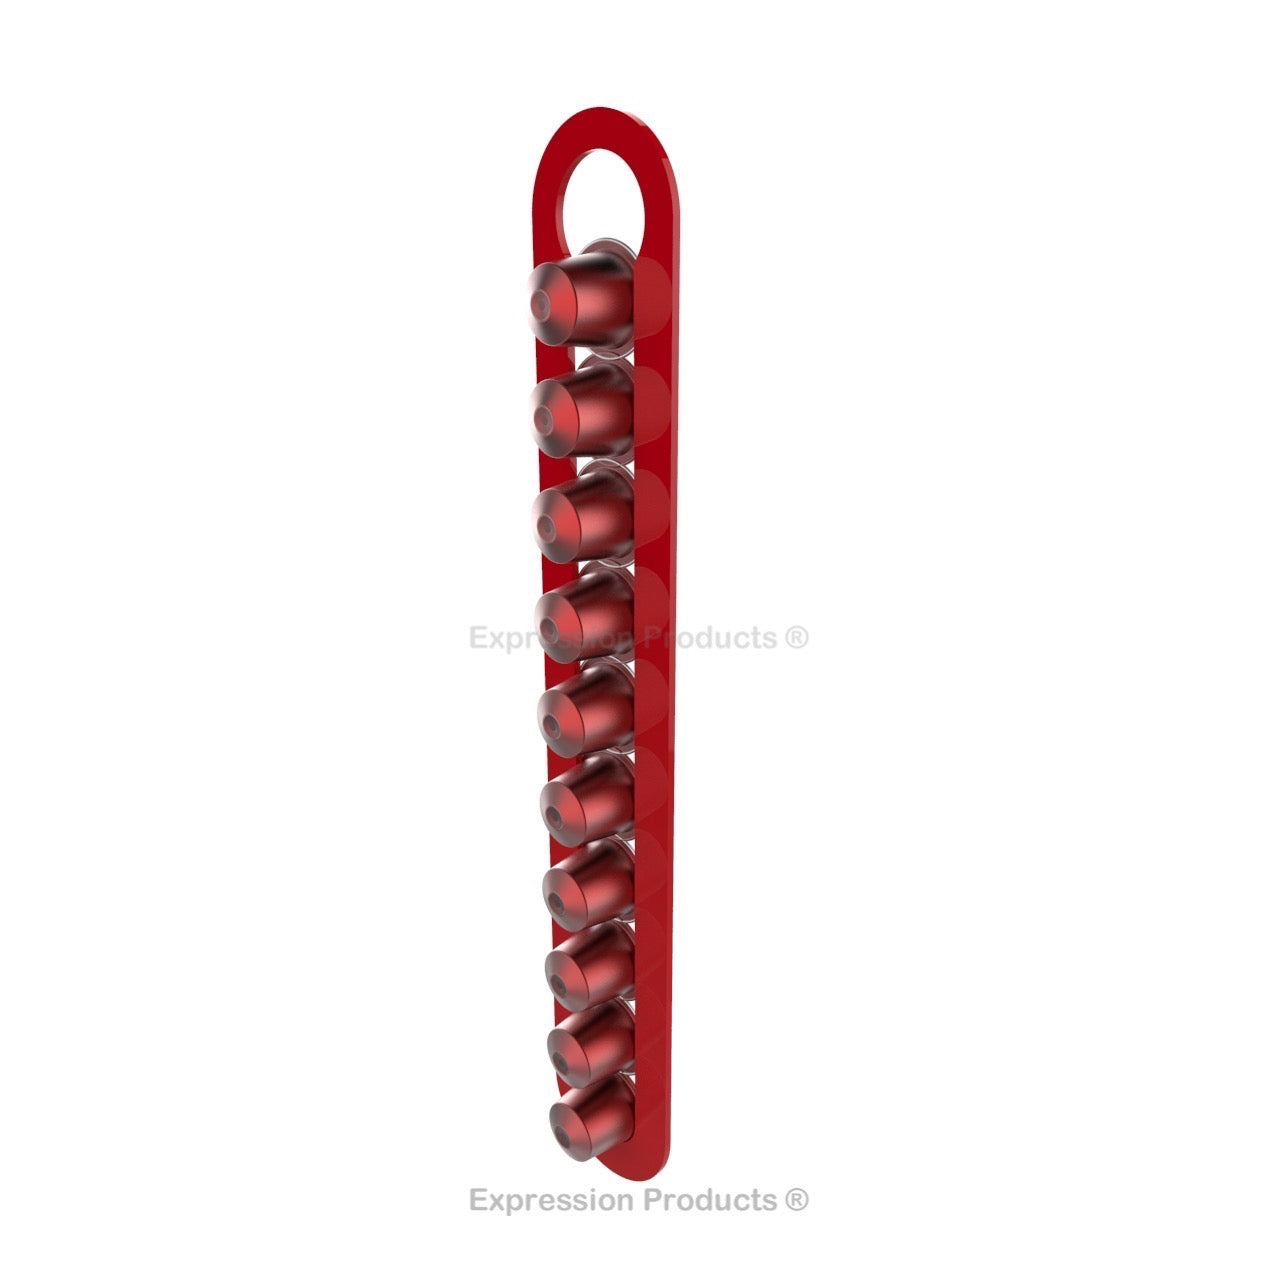 Magnetic Nespresso Original Line coffee pod holder shown in red holding 10 pods